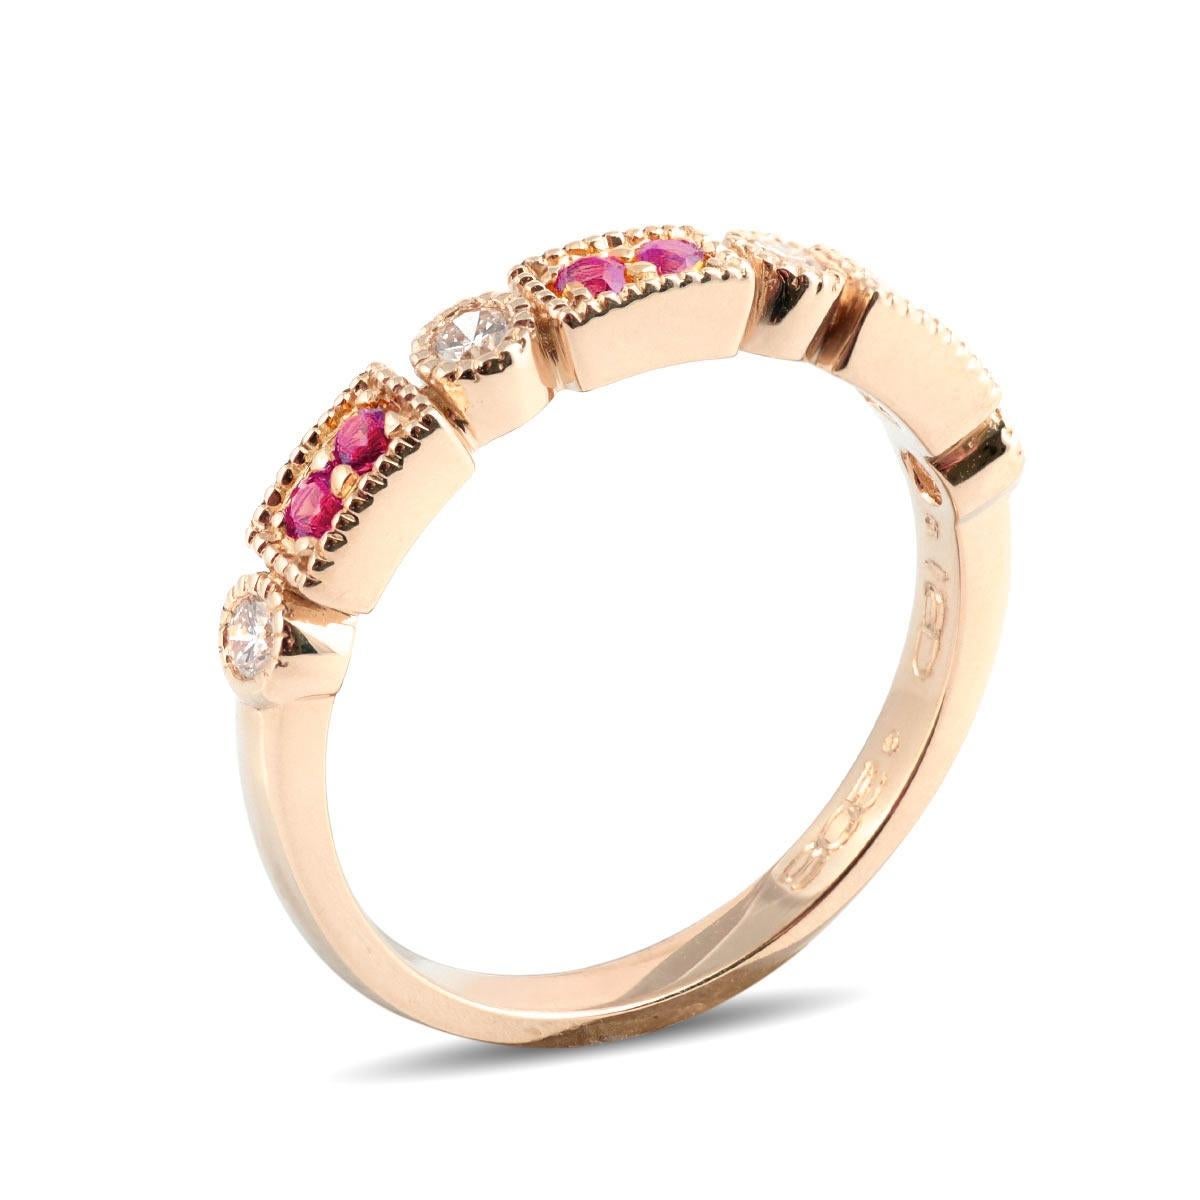 A colorful choice, here is a ring that comes set with 0.21 carats of luminous Pink Sapphires. Paired with diamonds in a 14K rose gold setting here is a ring right for any occasion. A subtle piece that adds color in the most elegant way, this is a